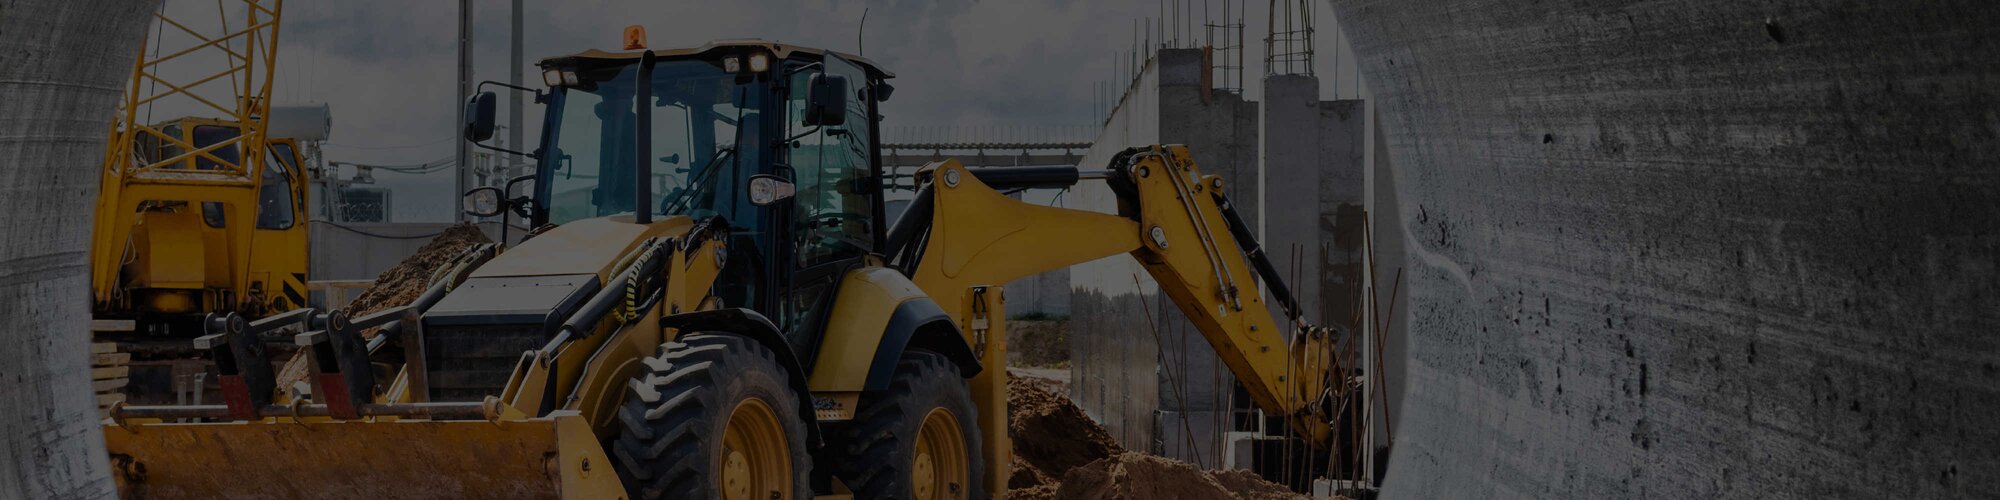 A yellow backhoe working next to a gray wall on a construction site